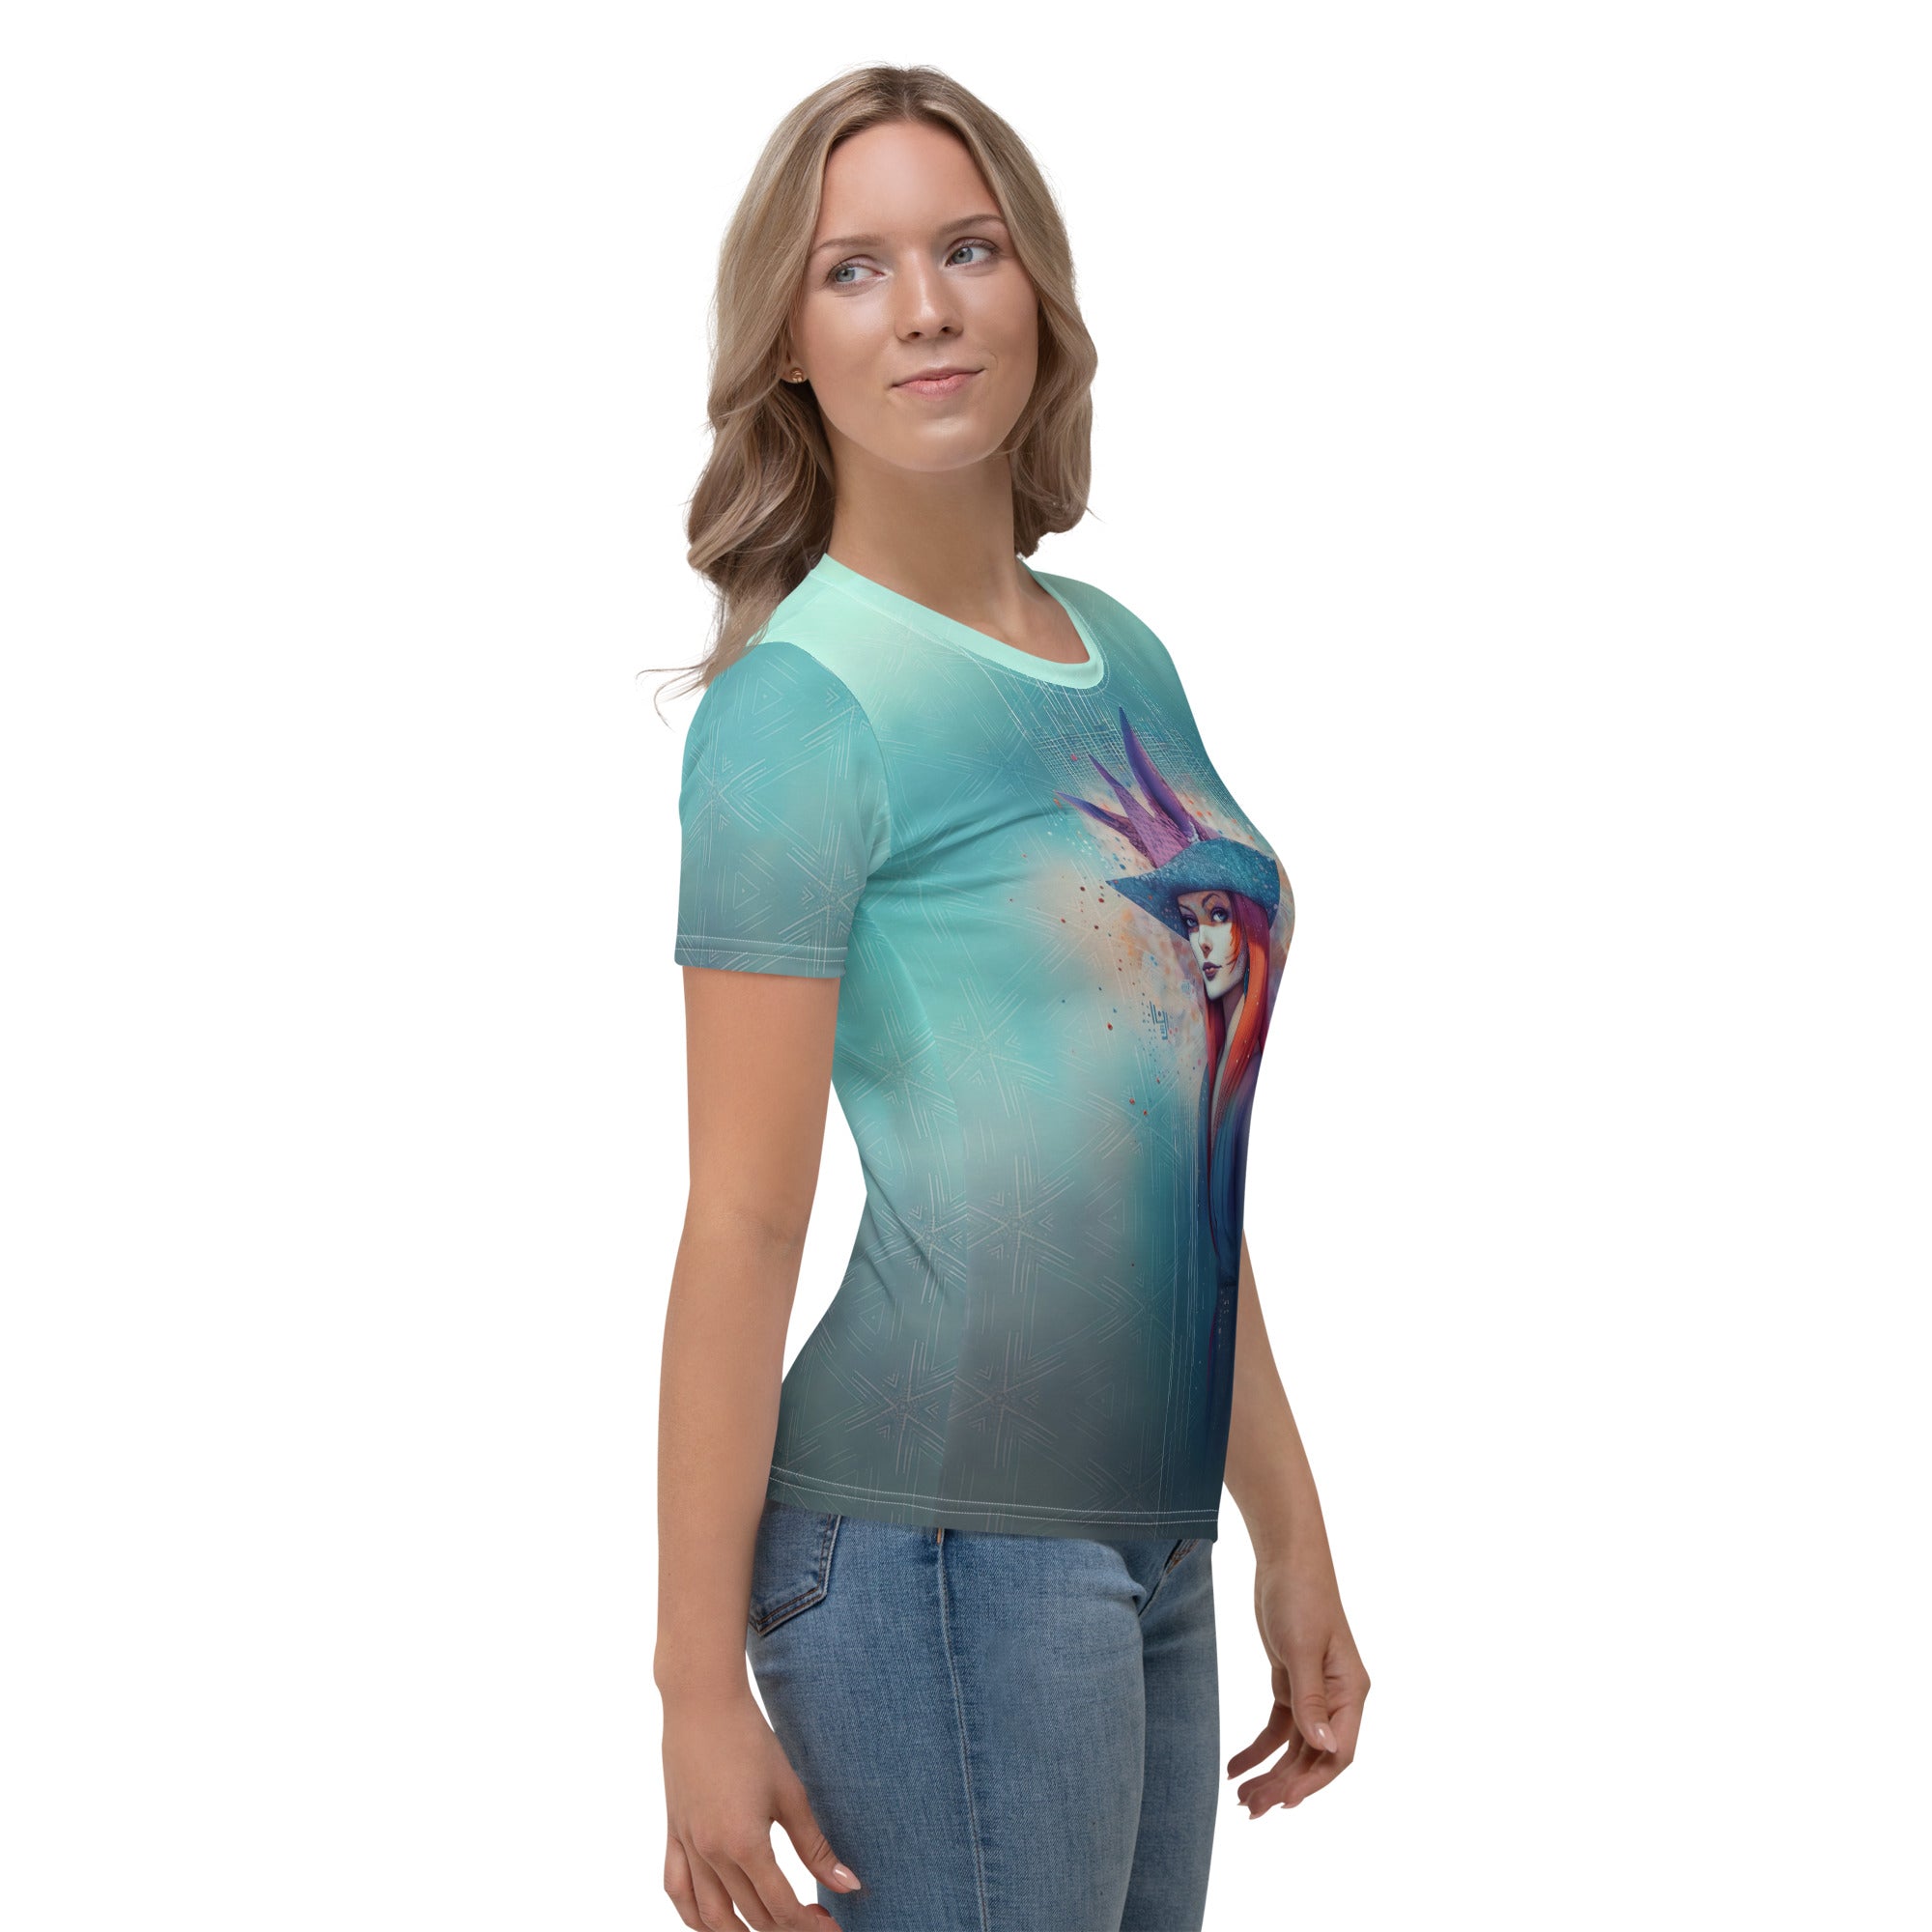 Ethereal Harmony Women's Crew Neck T-Shirt with subtle details